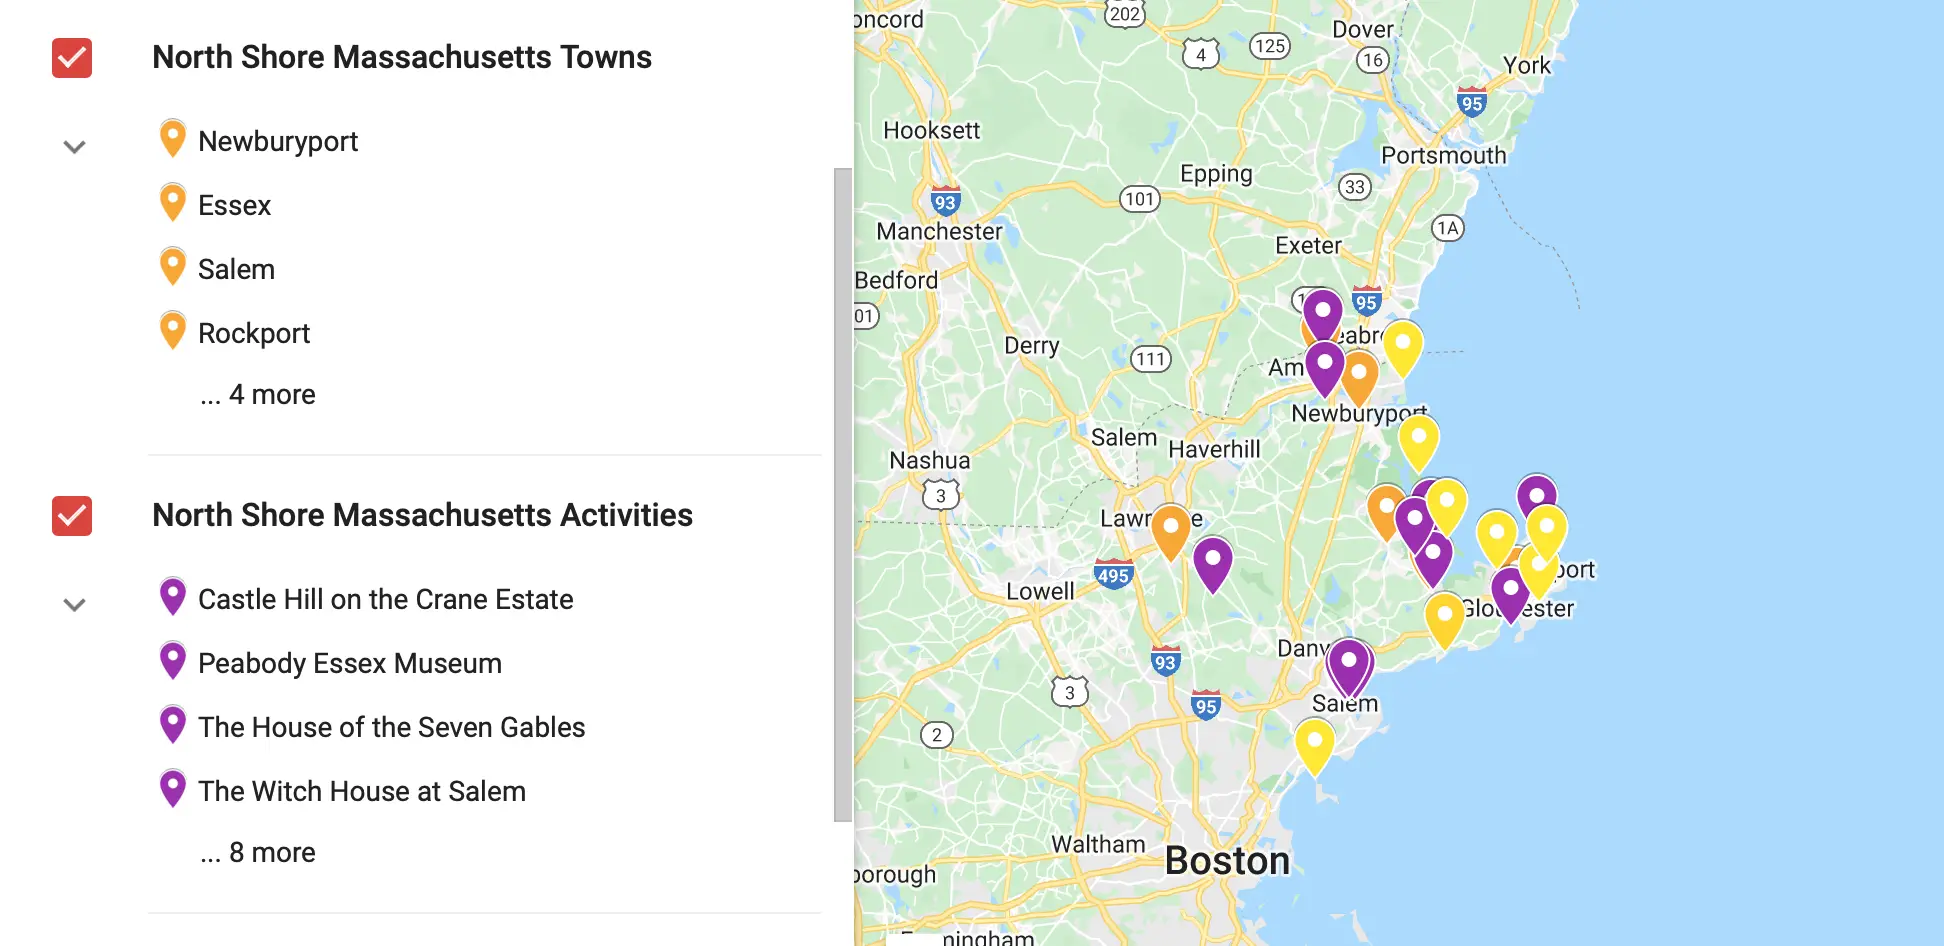 here's a handy North Shore Massachusetts map showing you the North Shore towns and the Massachusetts North Shore beaches